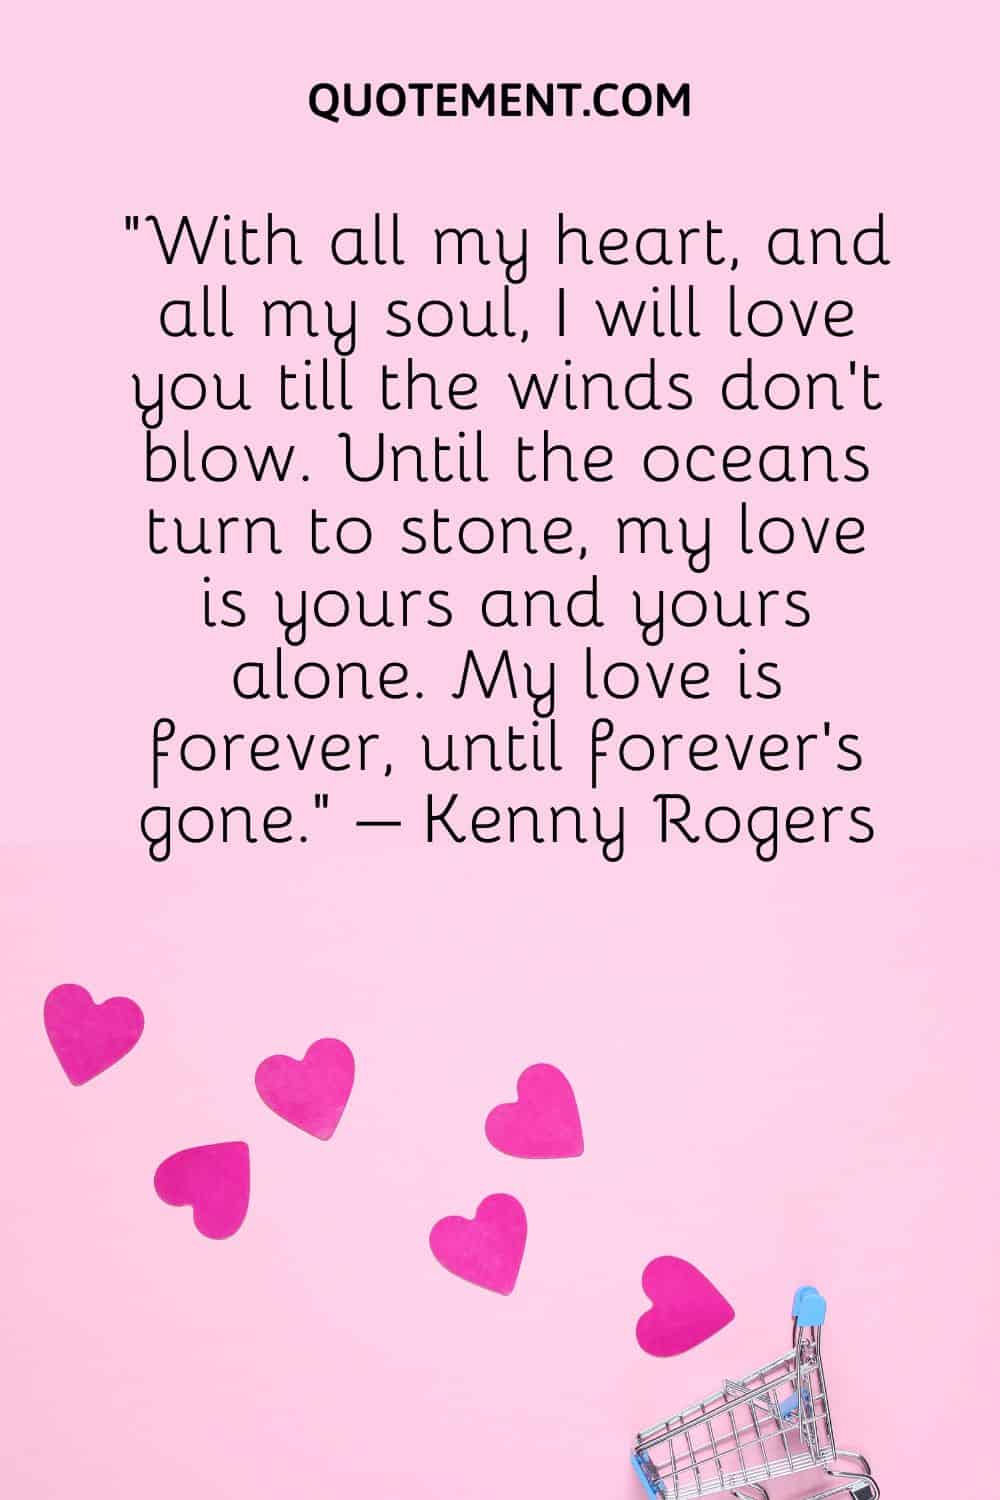 “With all my heart, and all my soul, I will love you till the winds don’t blow. Until the oceans turn to stone, my love is yours and yours alone. My love is forever, until forever’s gone.” – Kenny Rogers